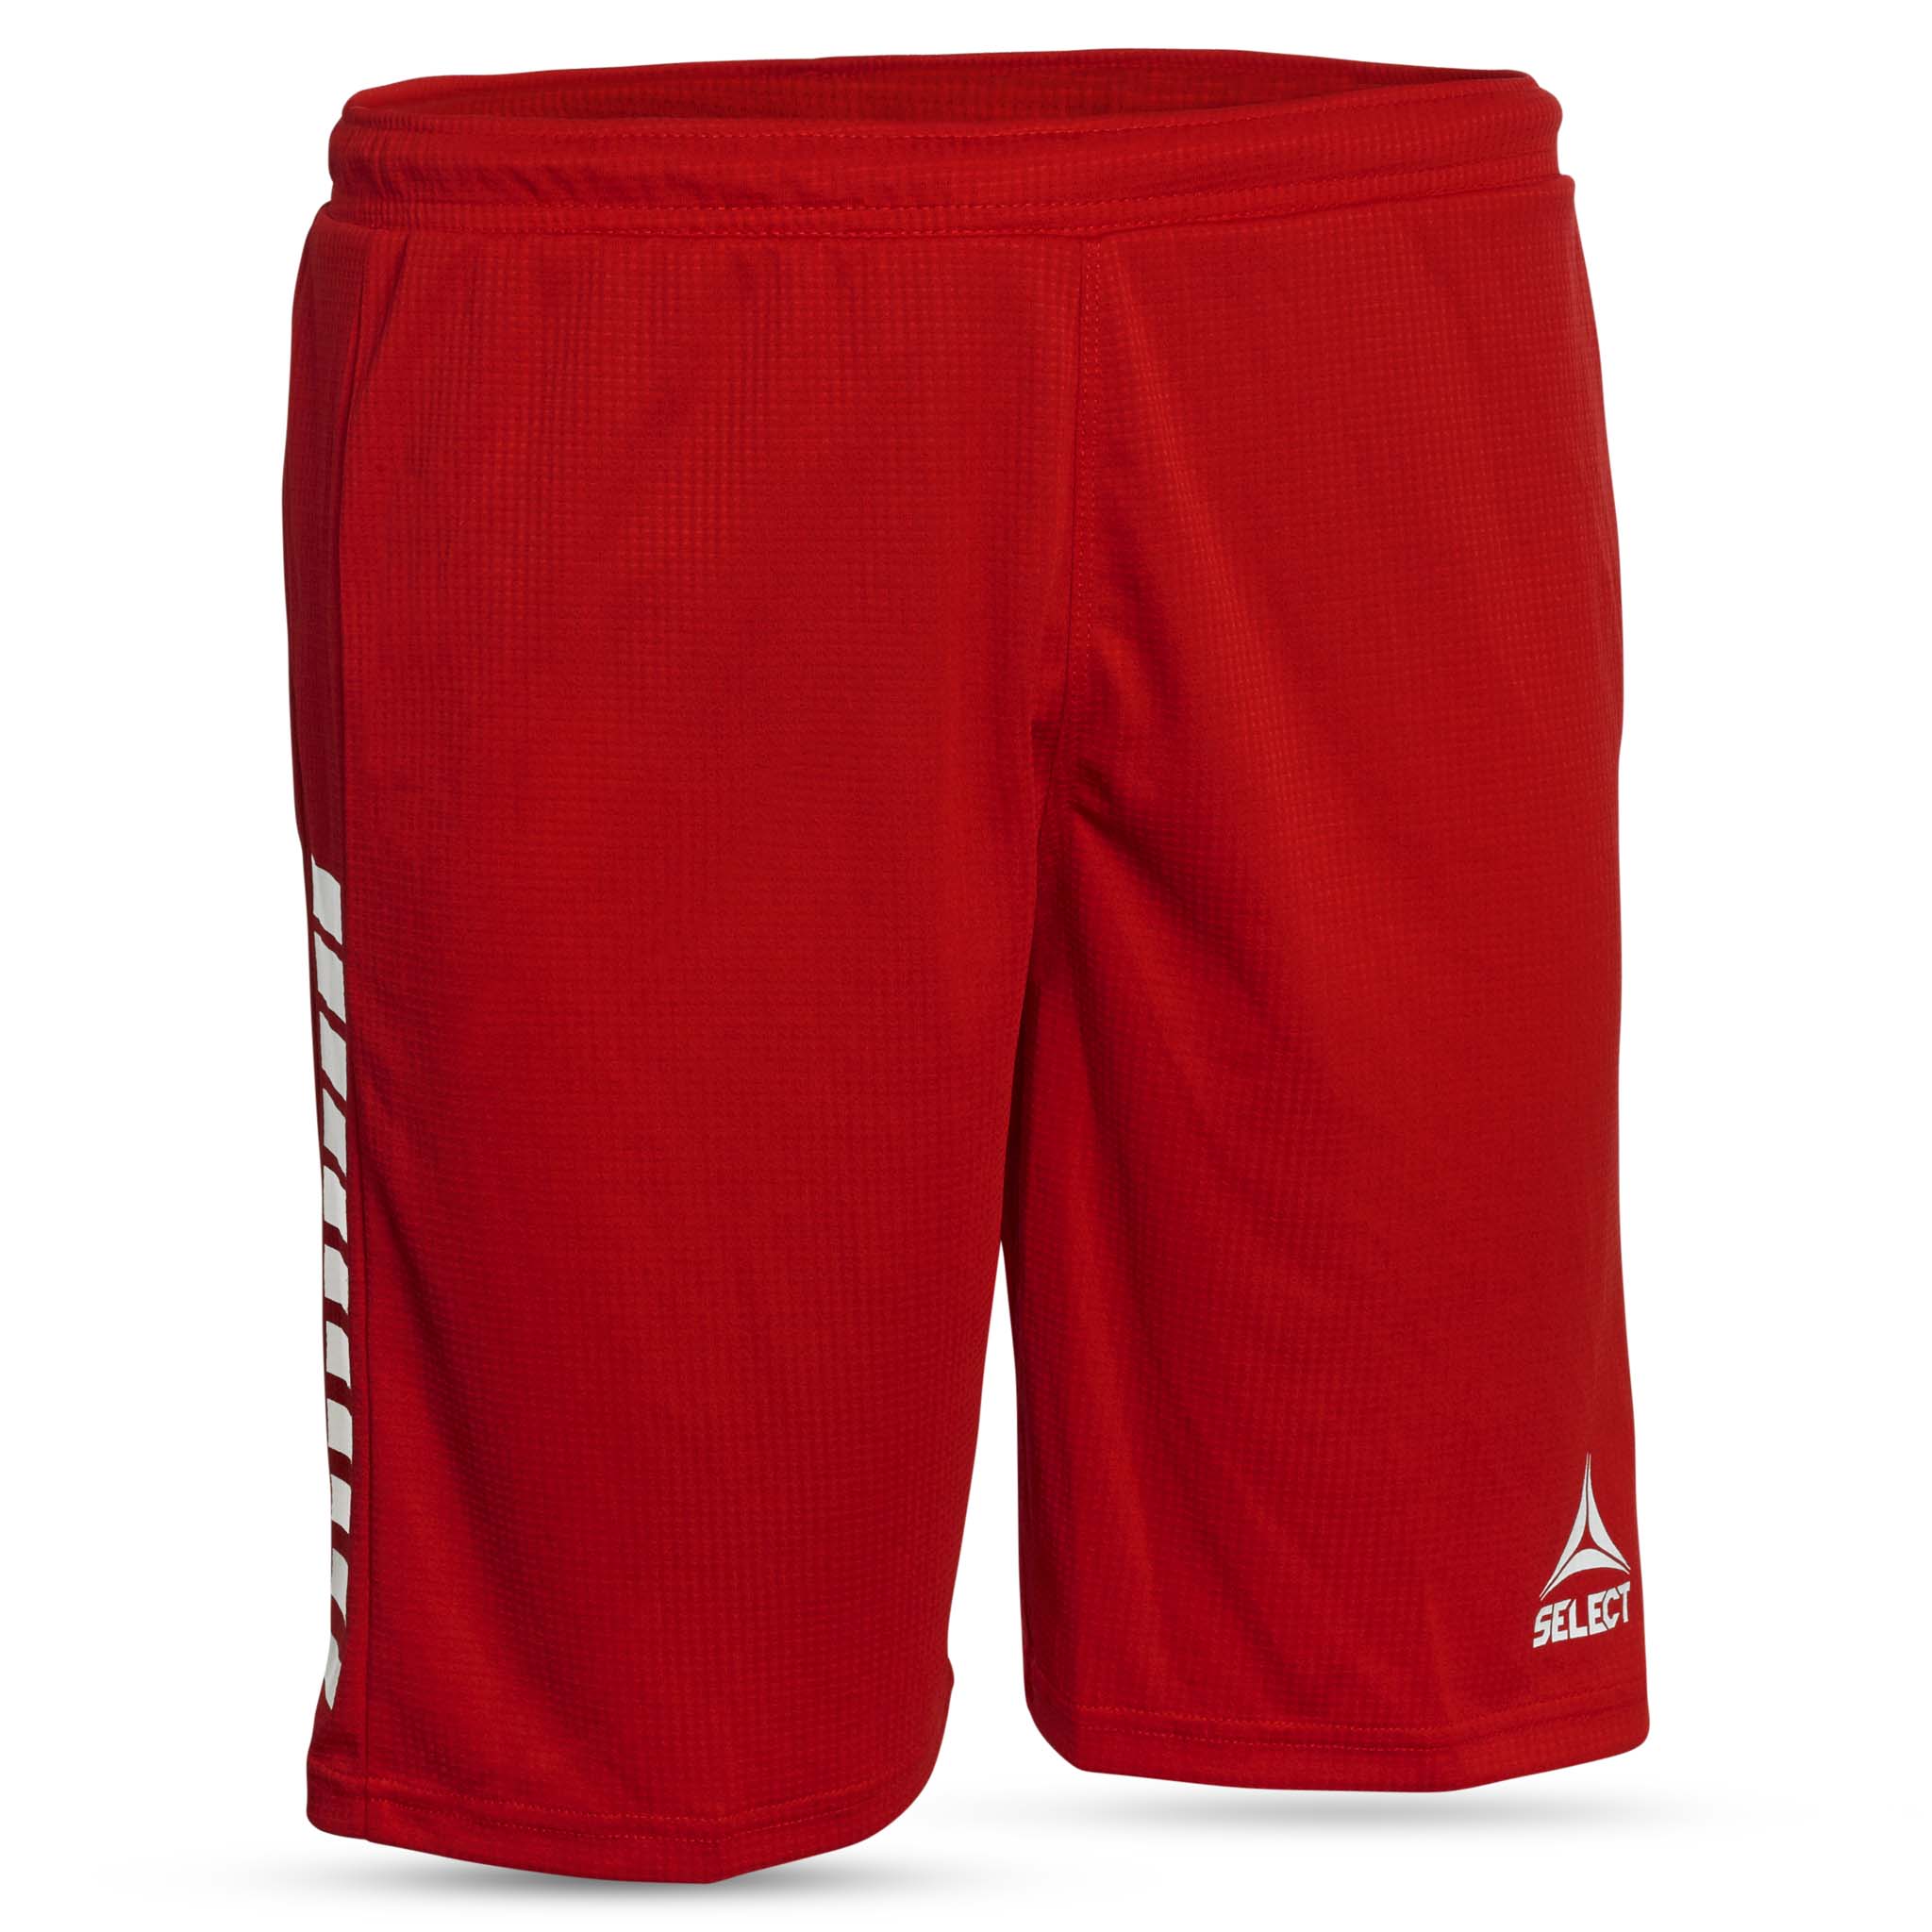 Player shorts - Monaco, youth #colour_red